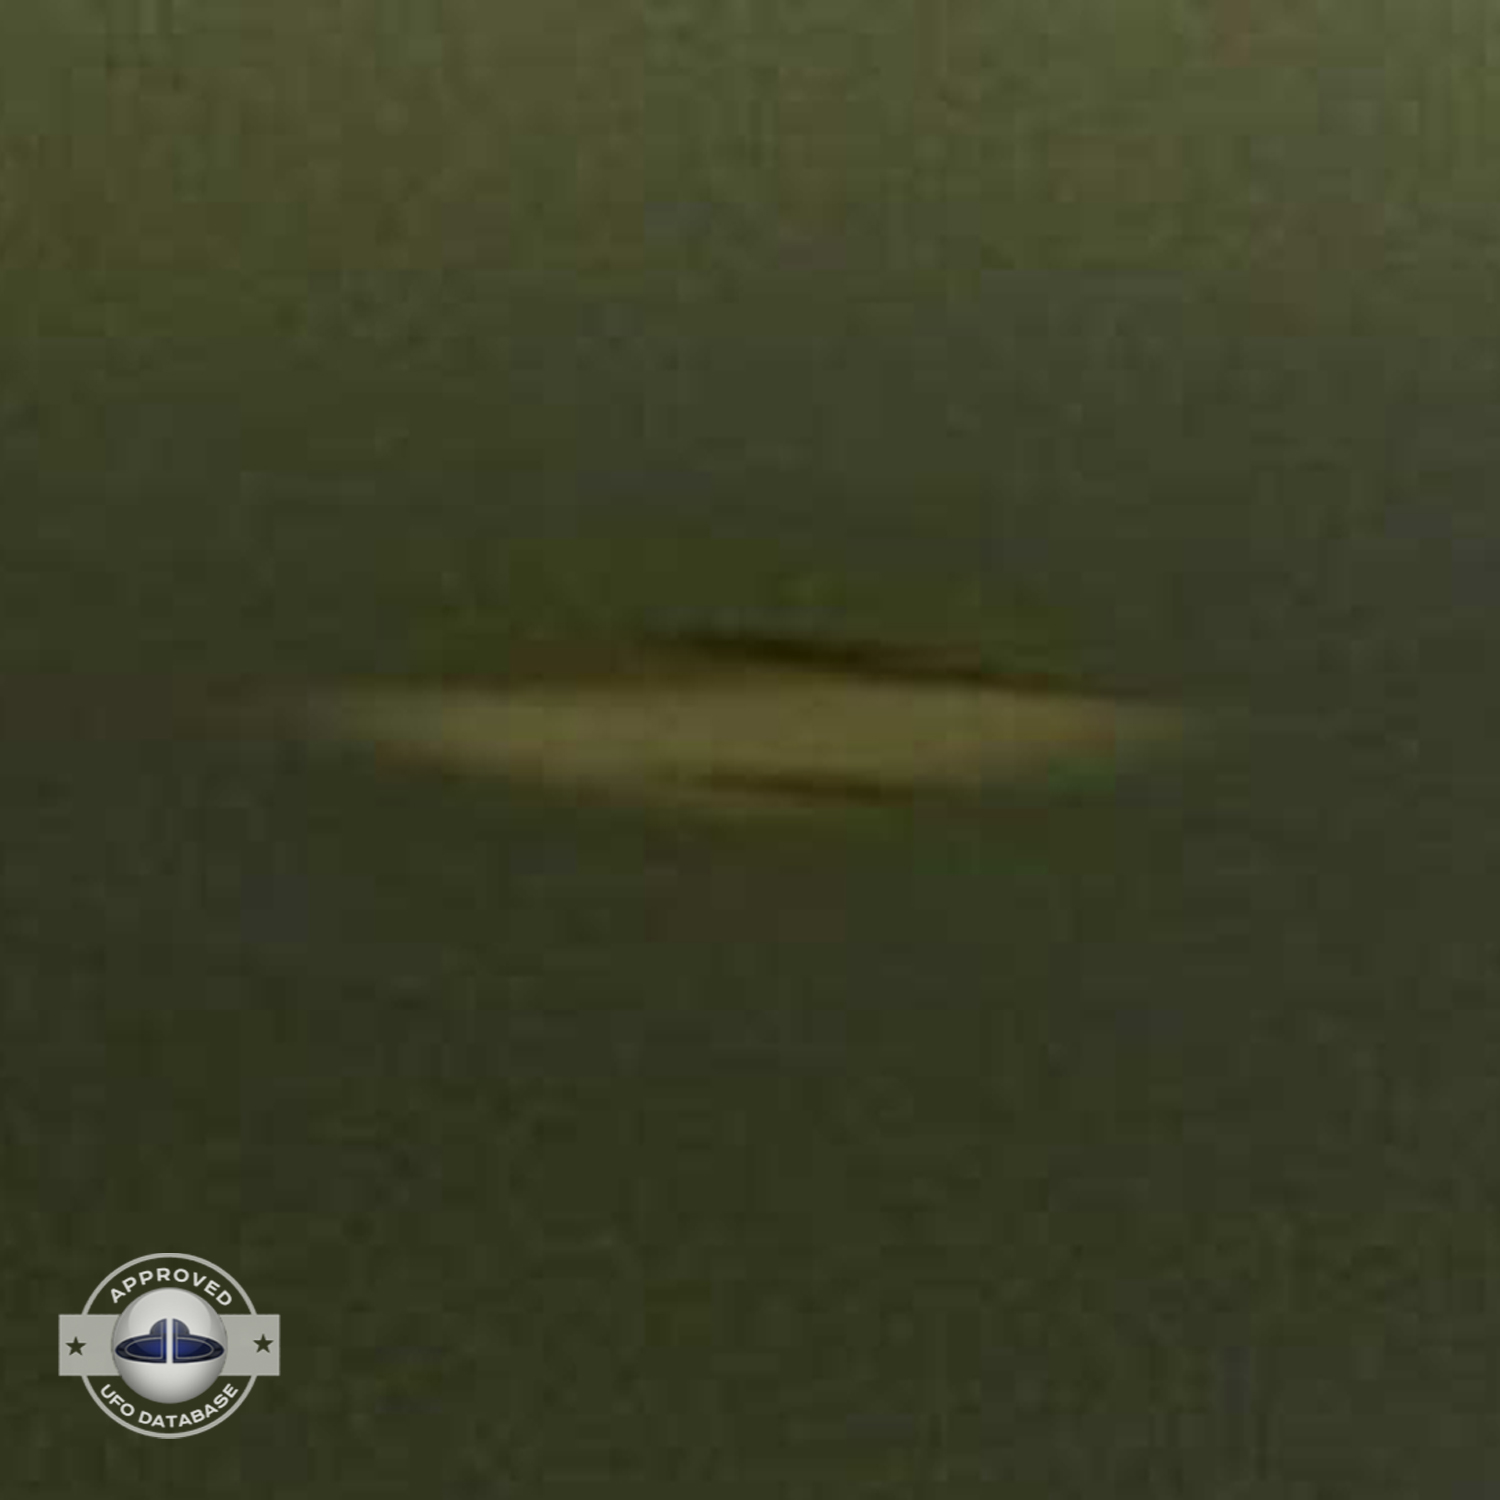 The ufo is moving over the Atlantic ocean in the Canary island UFO Picture #72-5